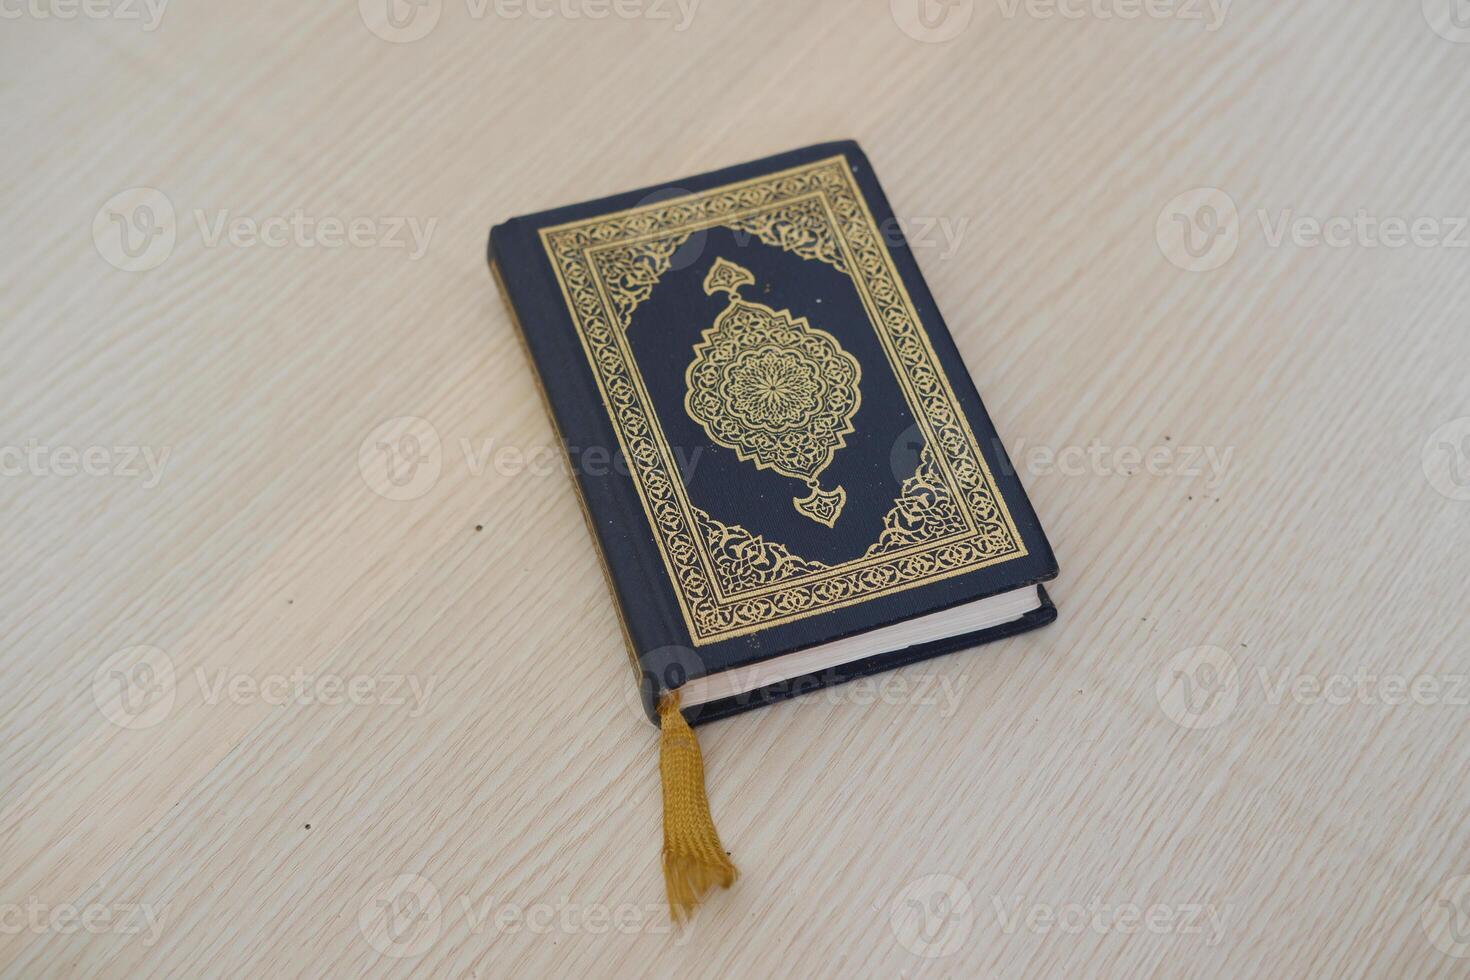 Quran - holy book of Muslims photo